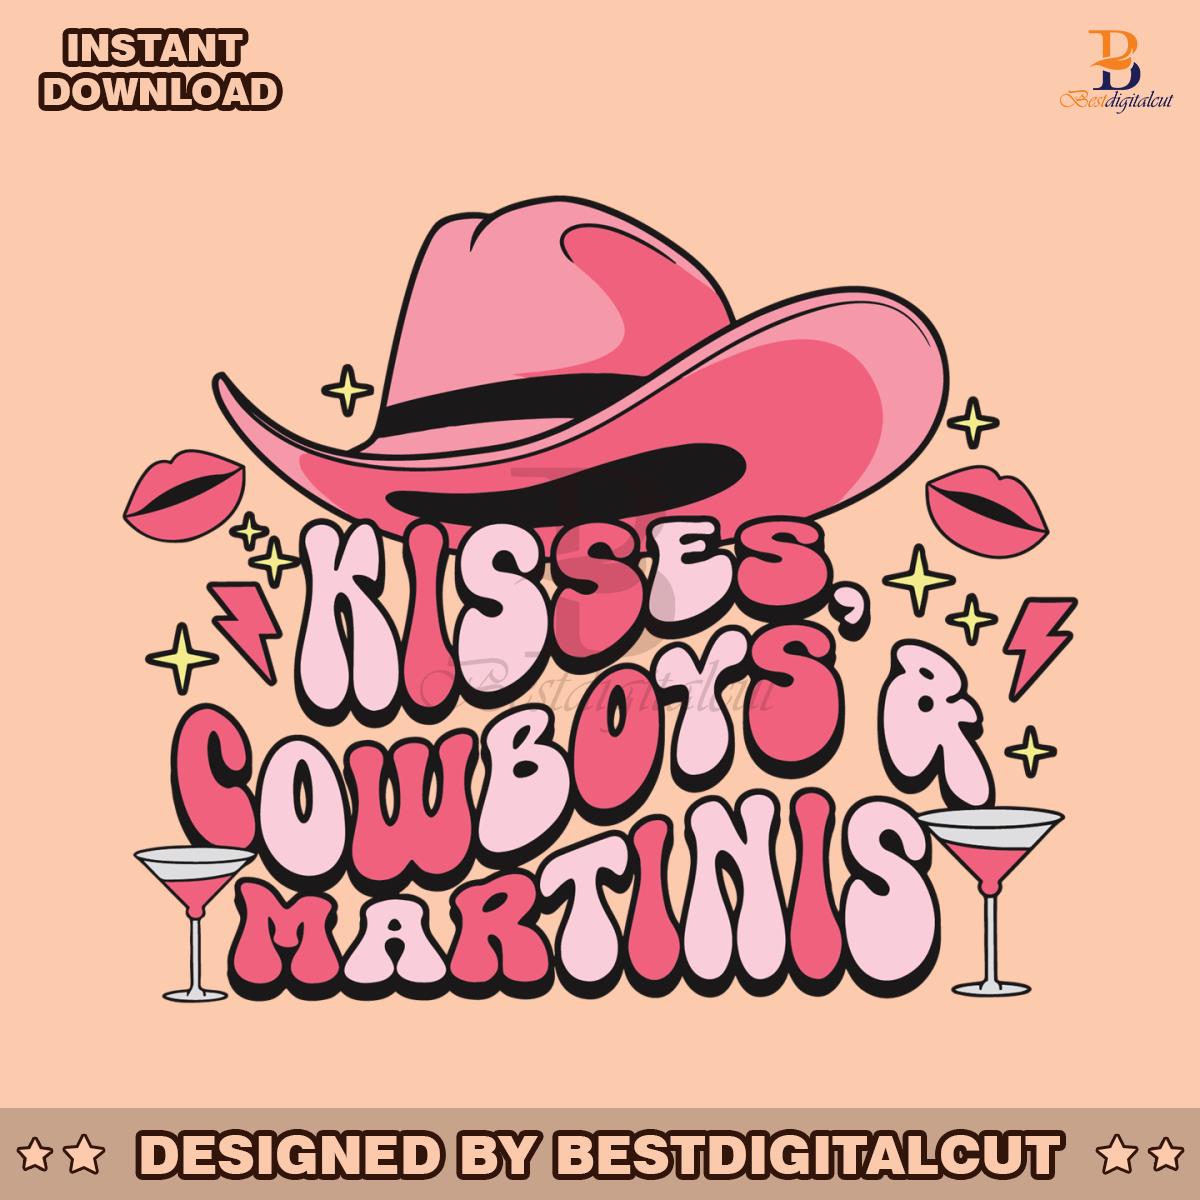 kisses-cowboys-and-martinis-svg